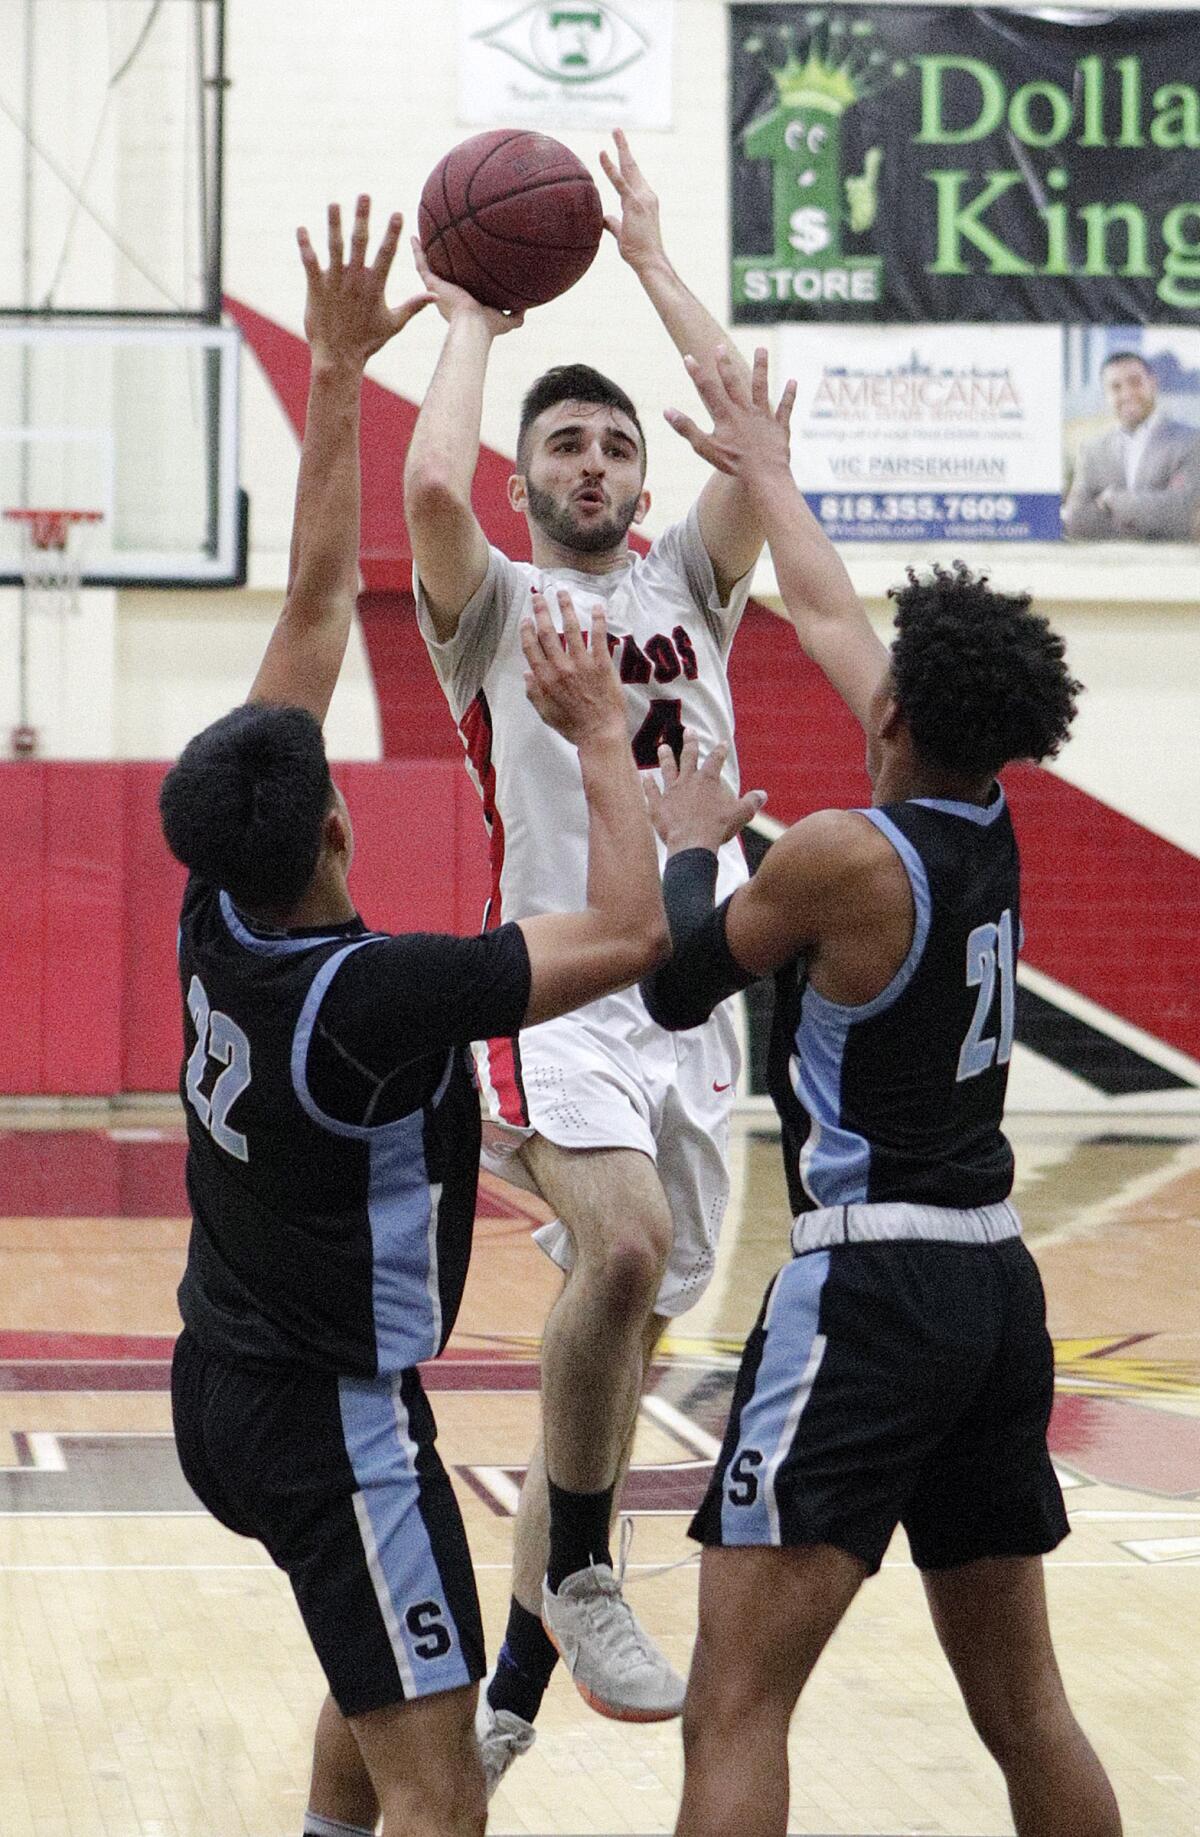 Glendale's David Shamiryan shoots against Salesian's Marc Pallares and Marvin Denson in the CIF Southern Section division III-AAA second-round boys' basketball playoff in at Glendale High School on Friday, February 14, 2020. Salesian won the game in overtime beating Glendale 55-49.